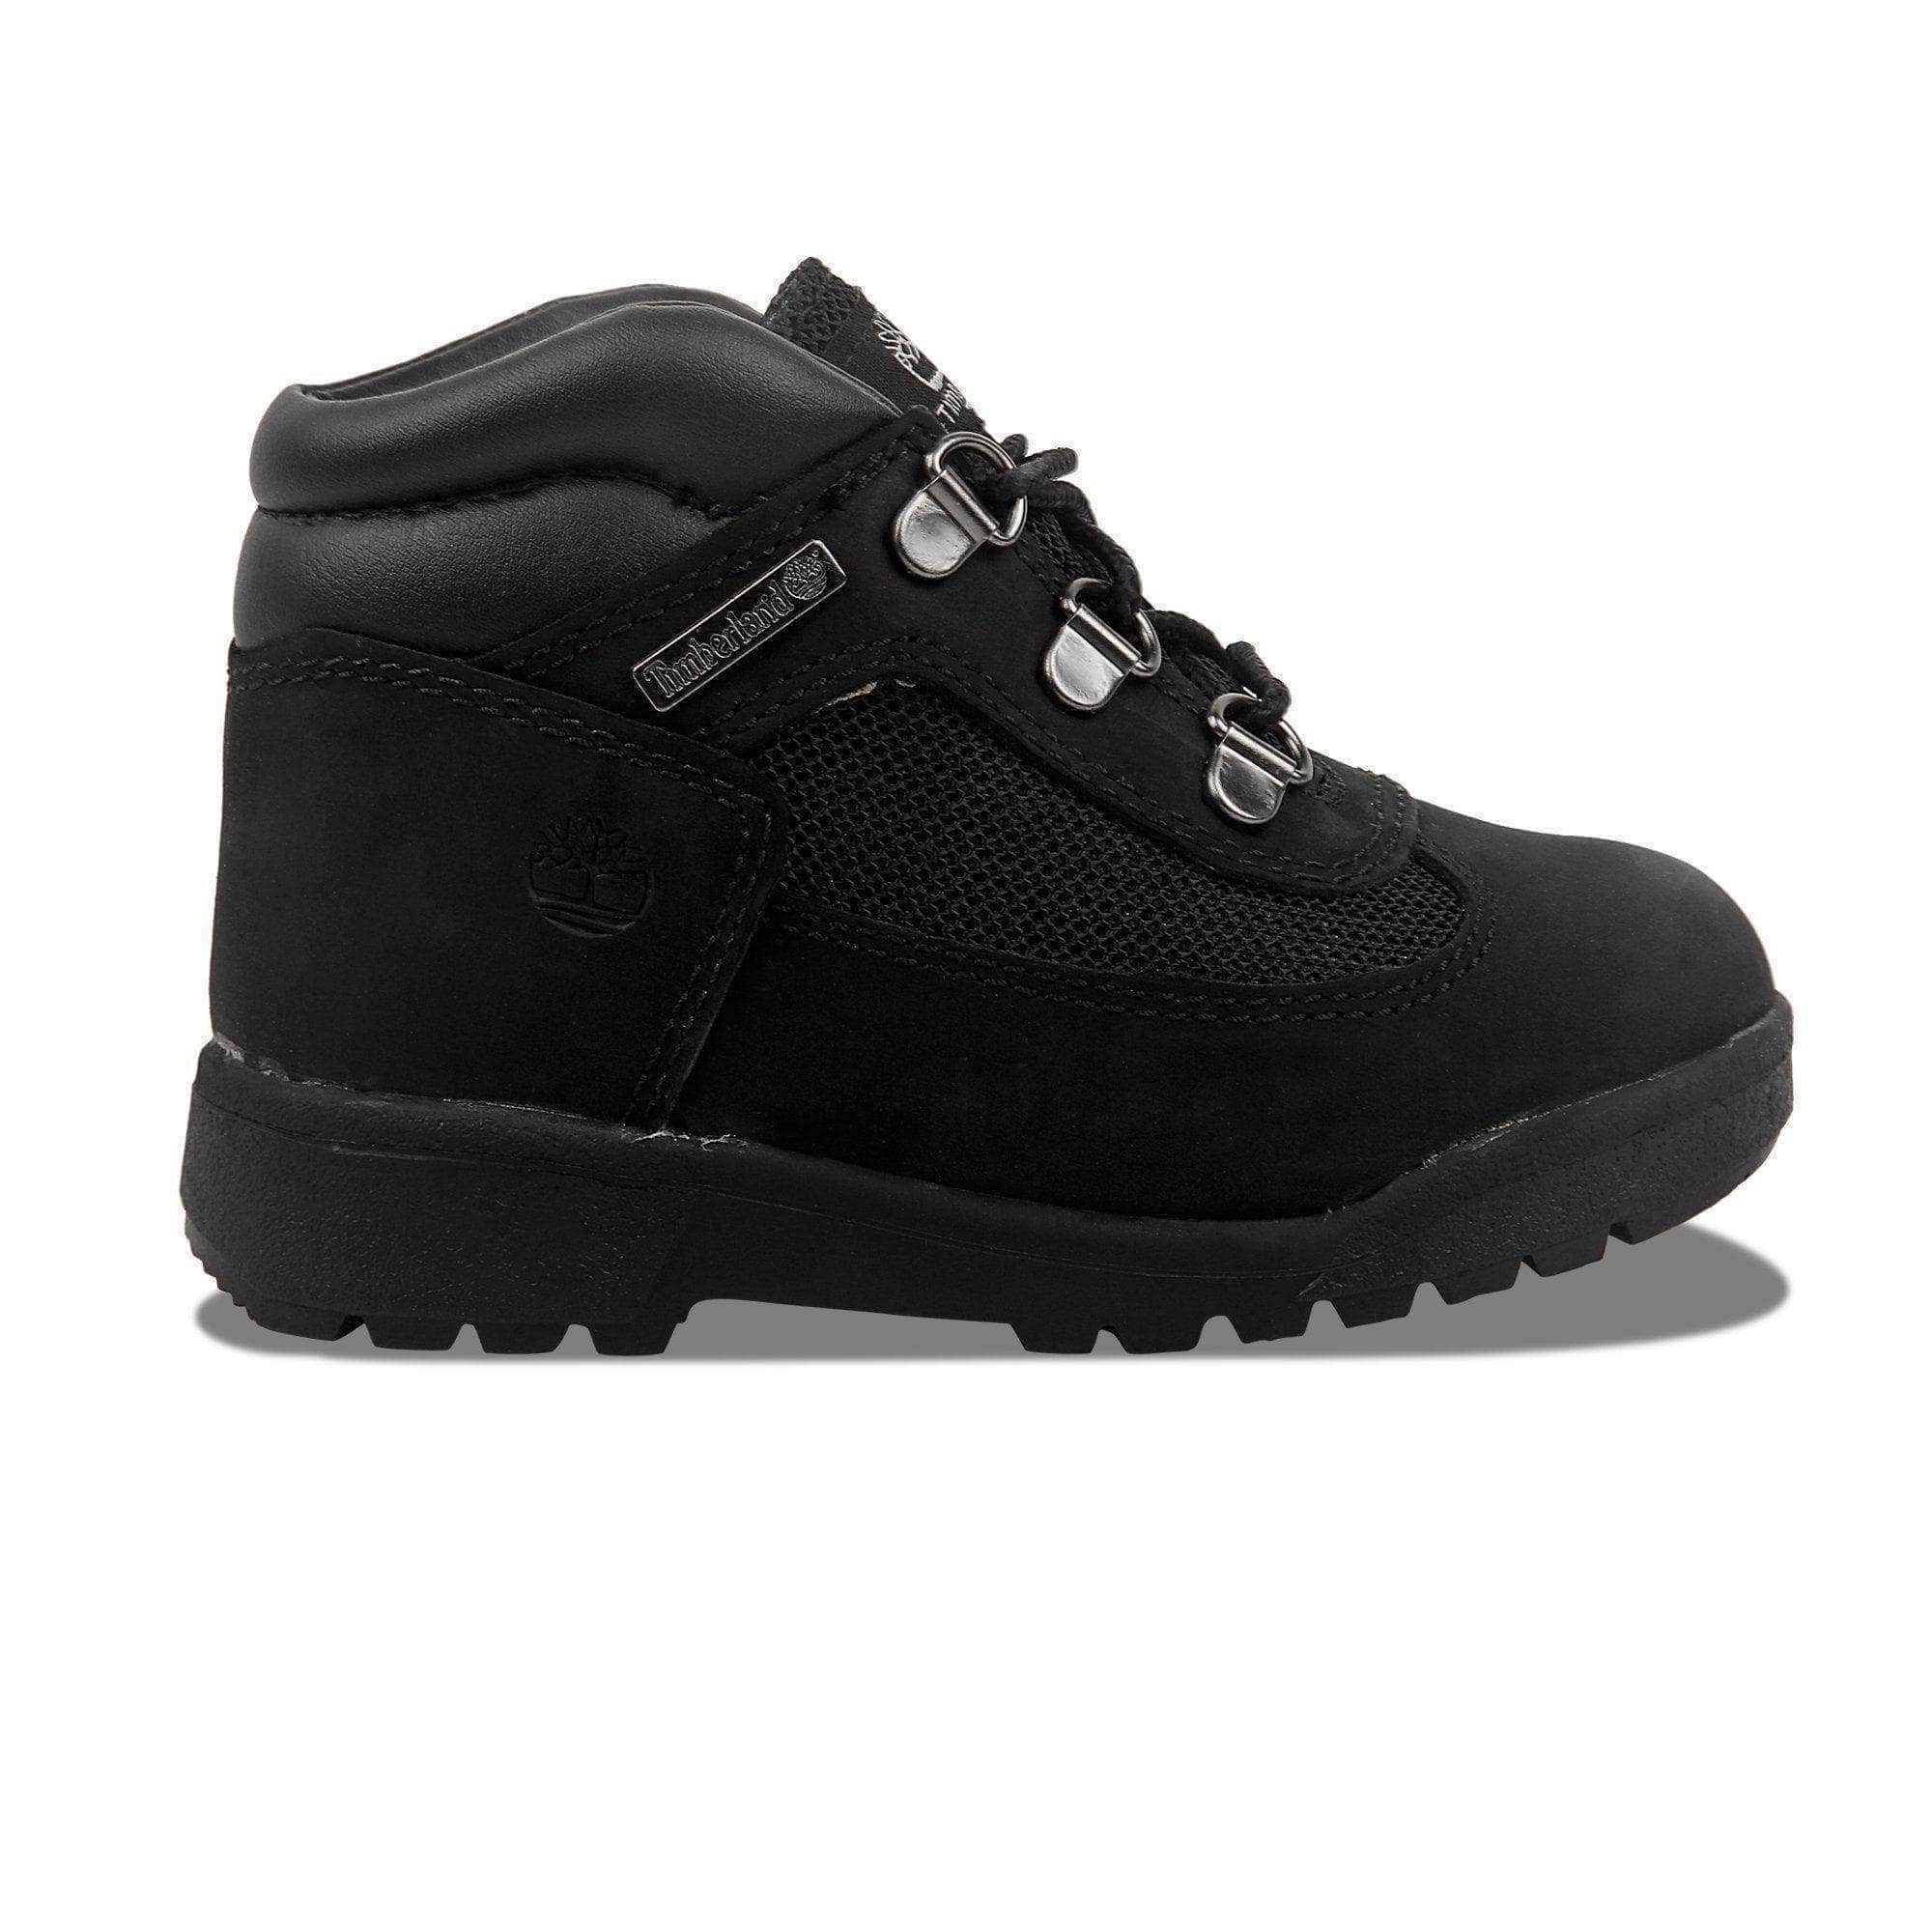 Timberland Scuff Proof Field Boot - Boy's Toddler